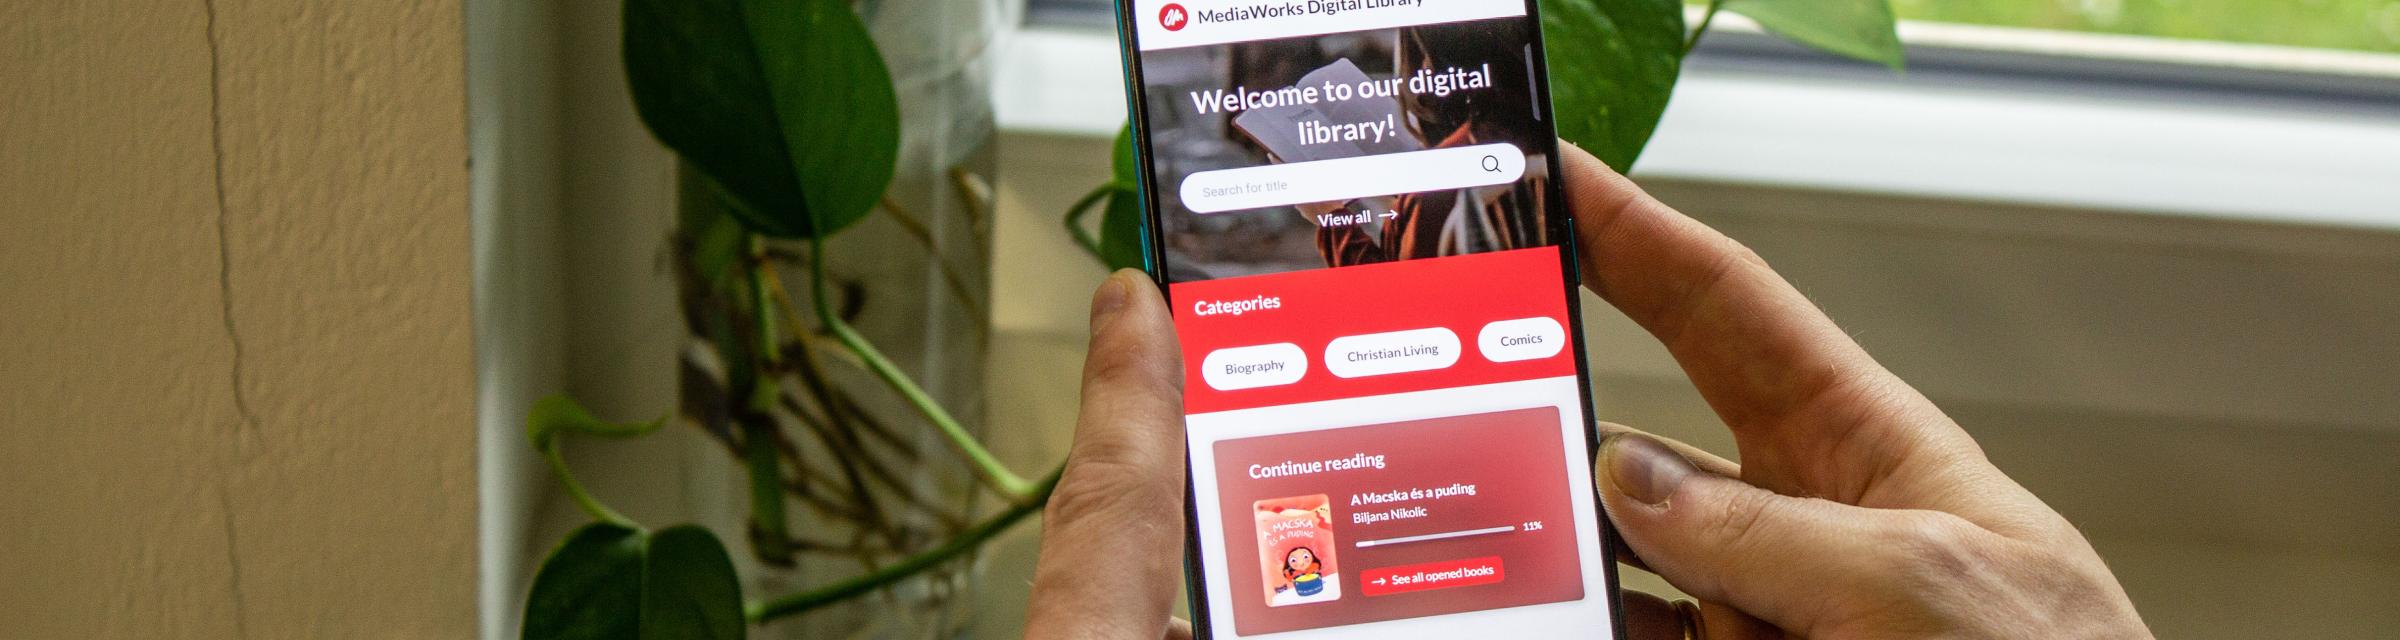 Smartphone displaying a digital library